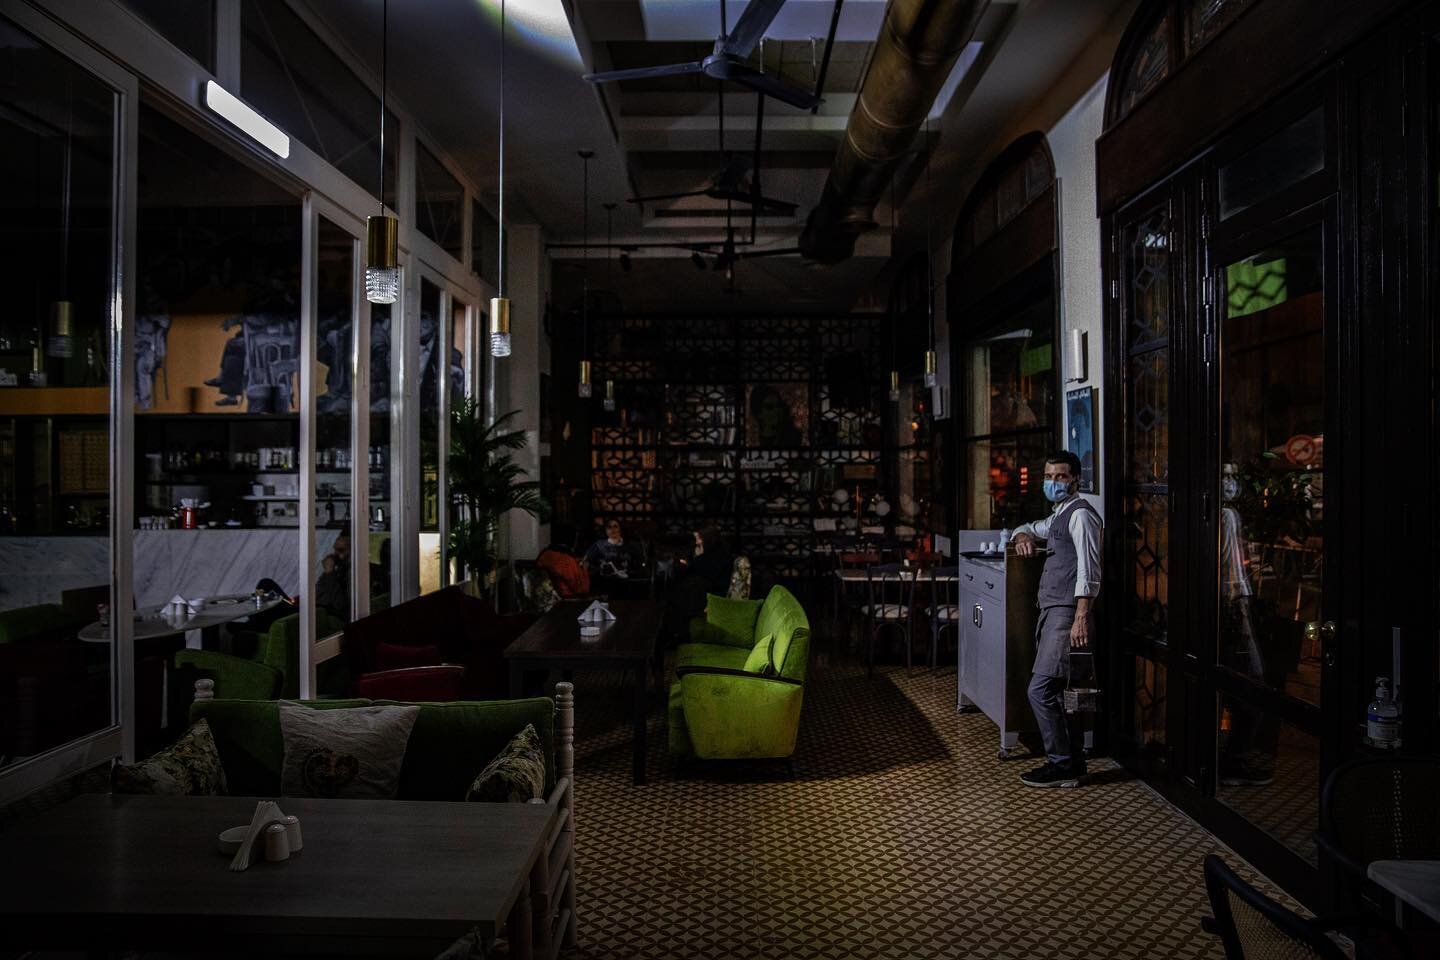 Beirut, Lebanon. April, 2021. For @bloomberg 
&bull;
A darkened empty restaurant during an electricity cut in Beirut.
Lebanon's annual inflation rate reached a record high and food prices soared by around 400% in December, highlighting the dramatic i